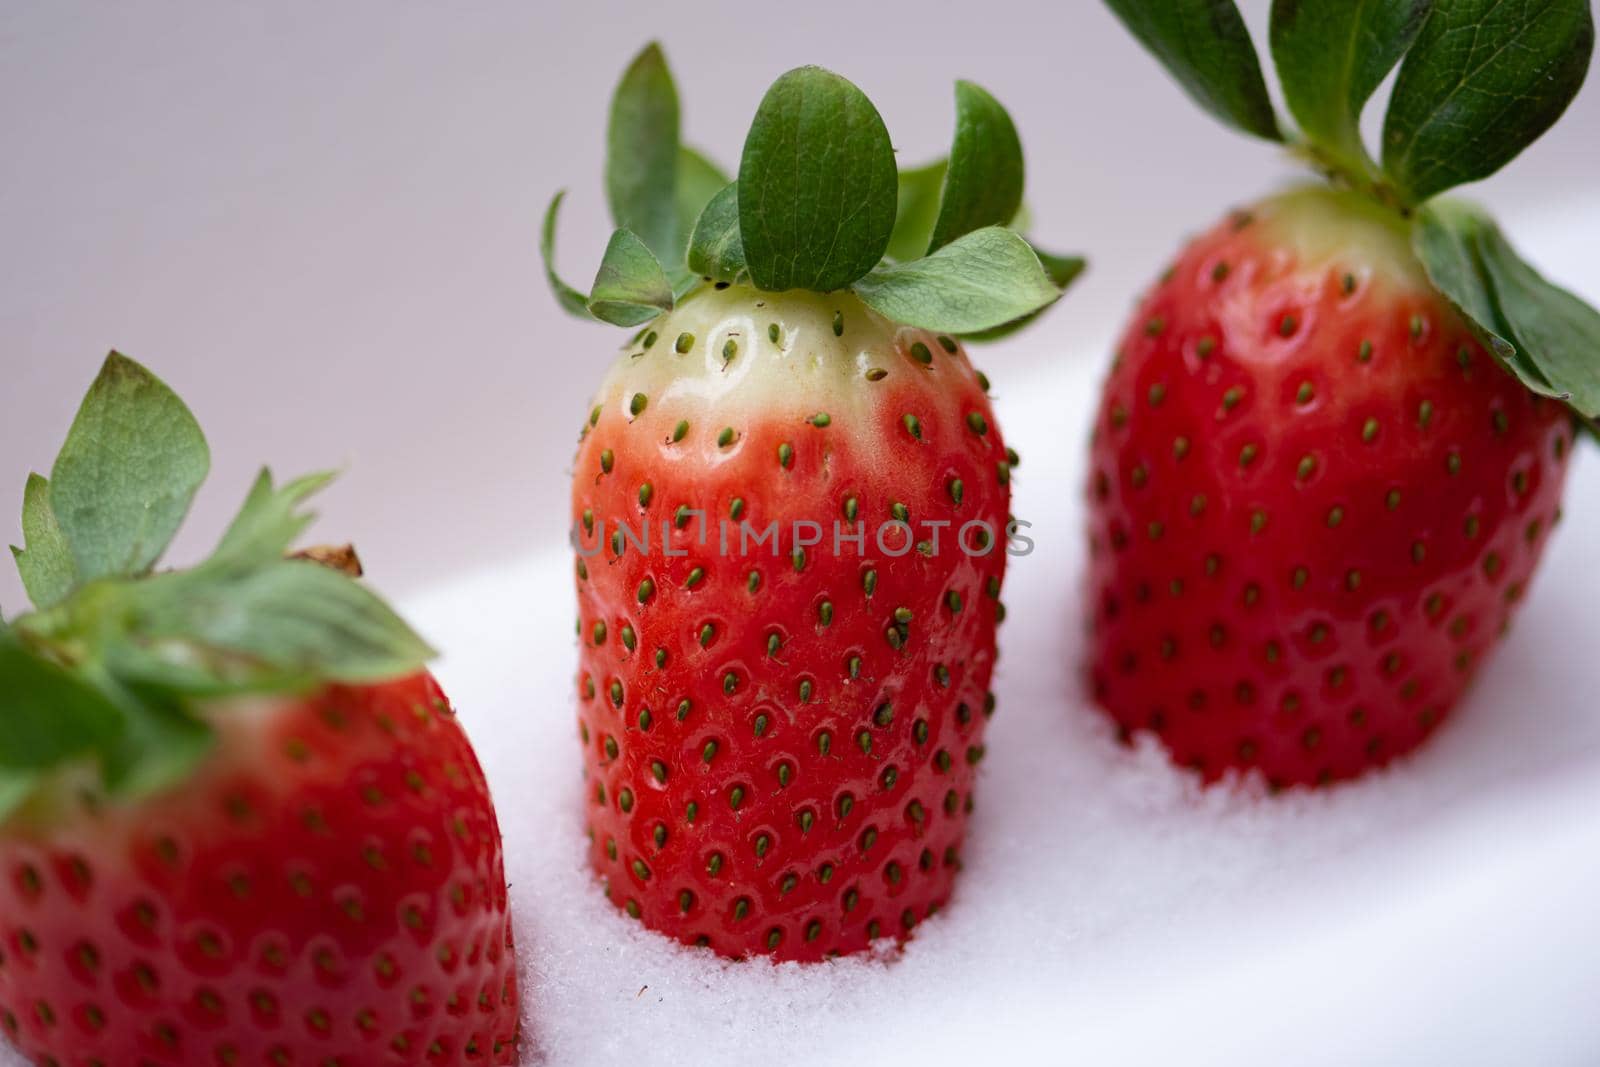 Closeup shot of appetizing fresh large strawberries laying in the snow